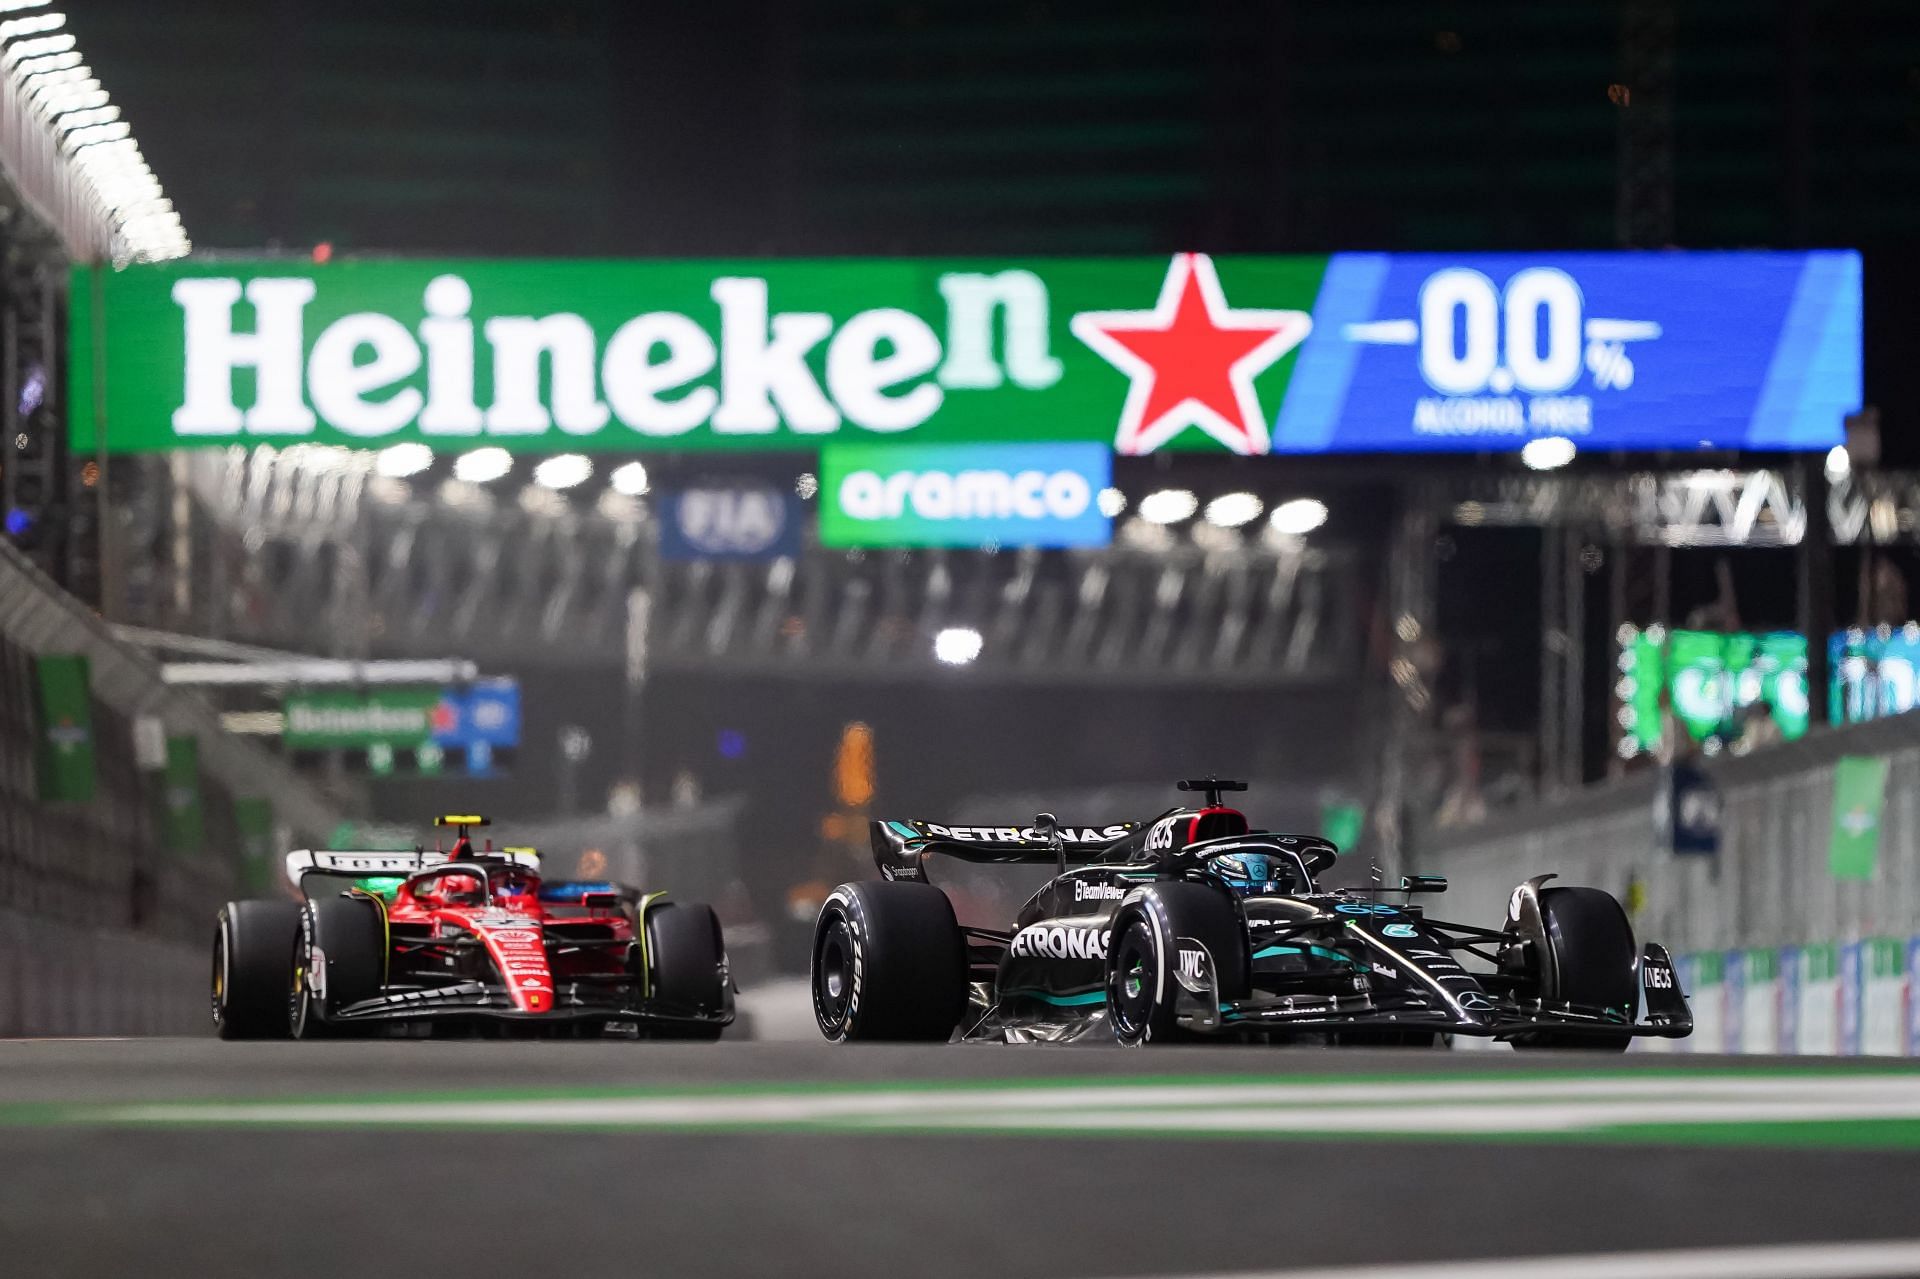 Mercedes and Ferrari to battle for the second place in the final race of the season (Photo by Alex Bierens de Haan/Getty Images for Heineken)